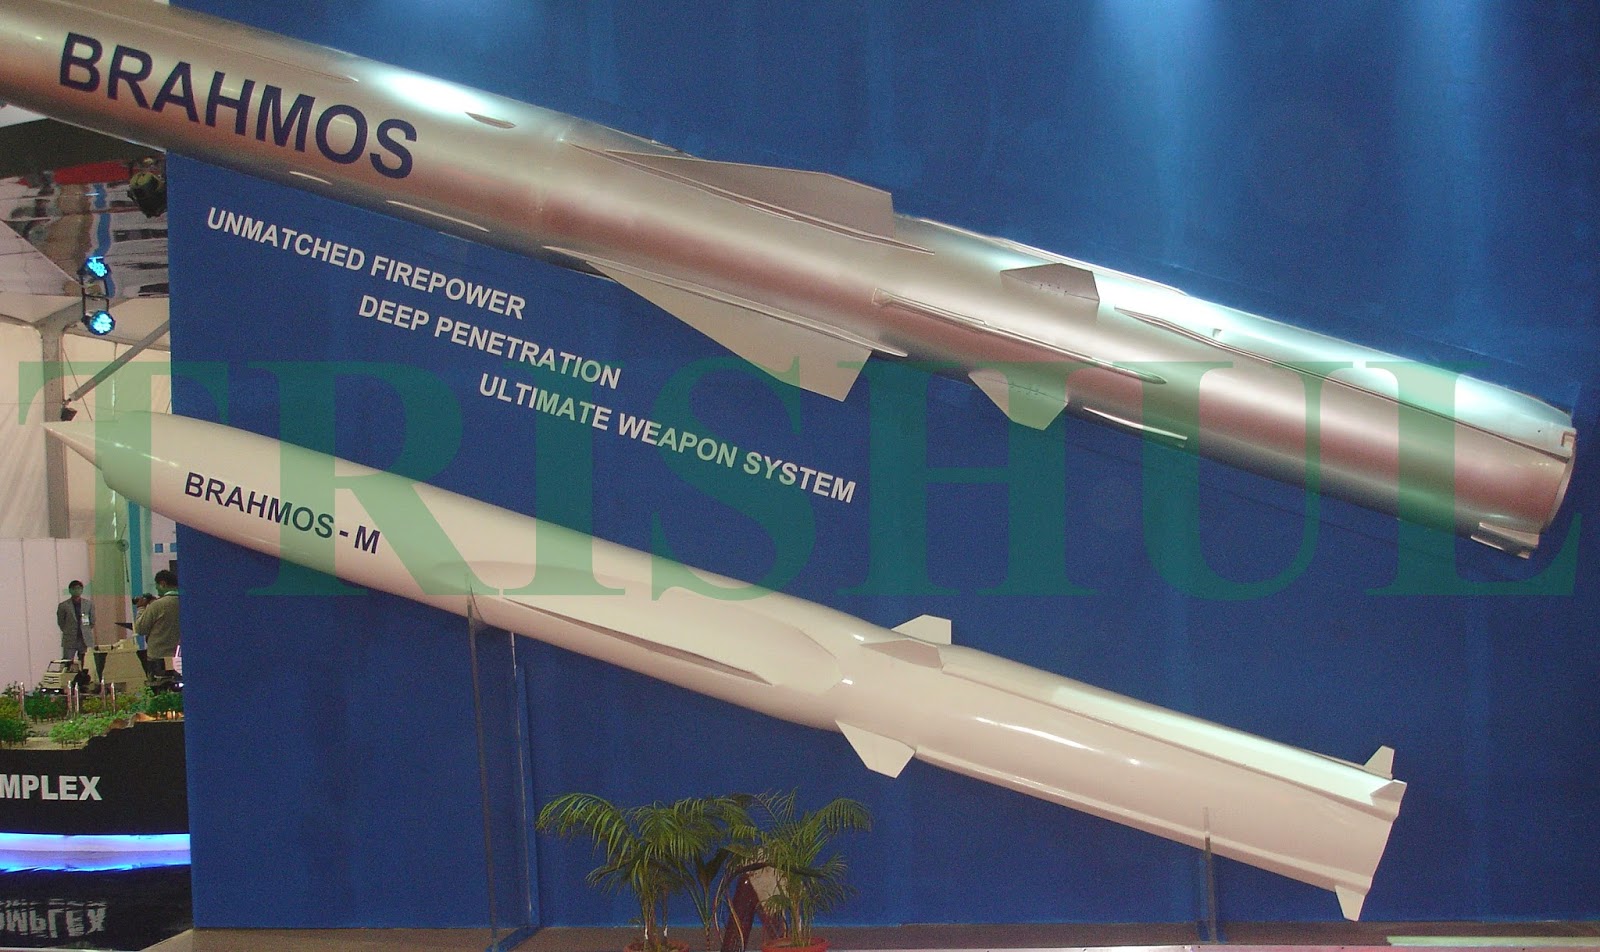 BrahMos-M+Air-Launched+Supersonic+Cruise+Missile.jpg